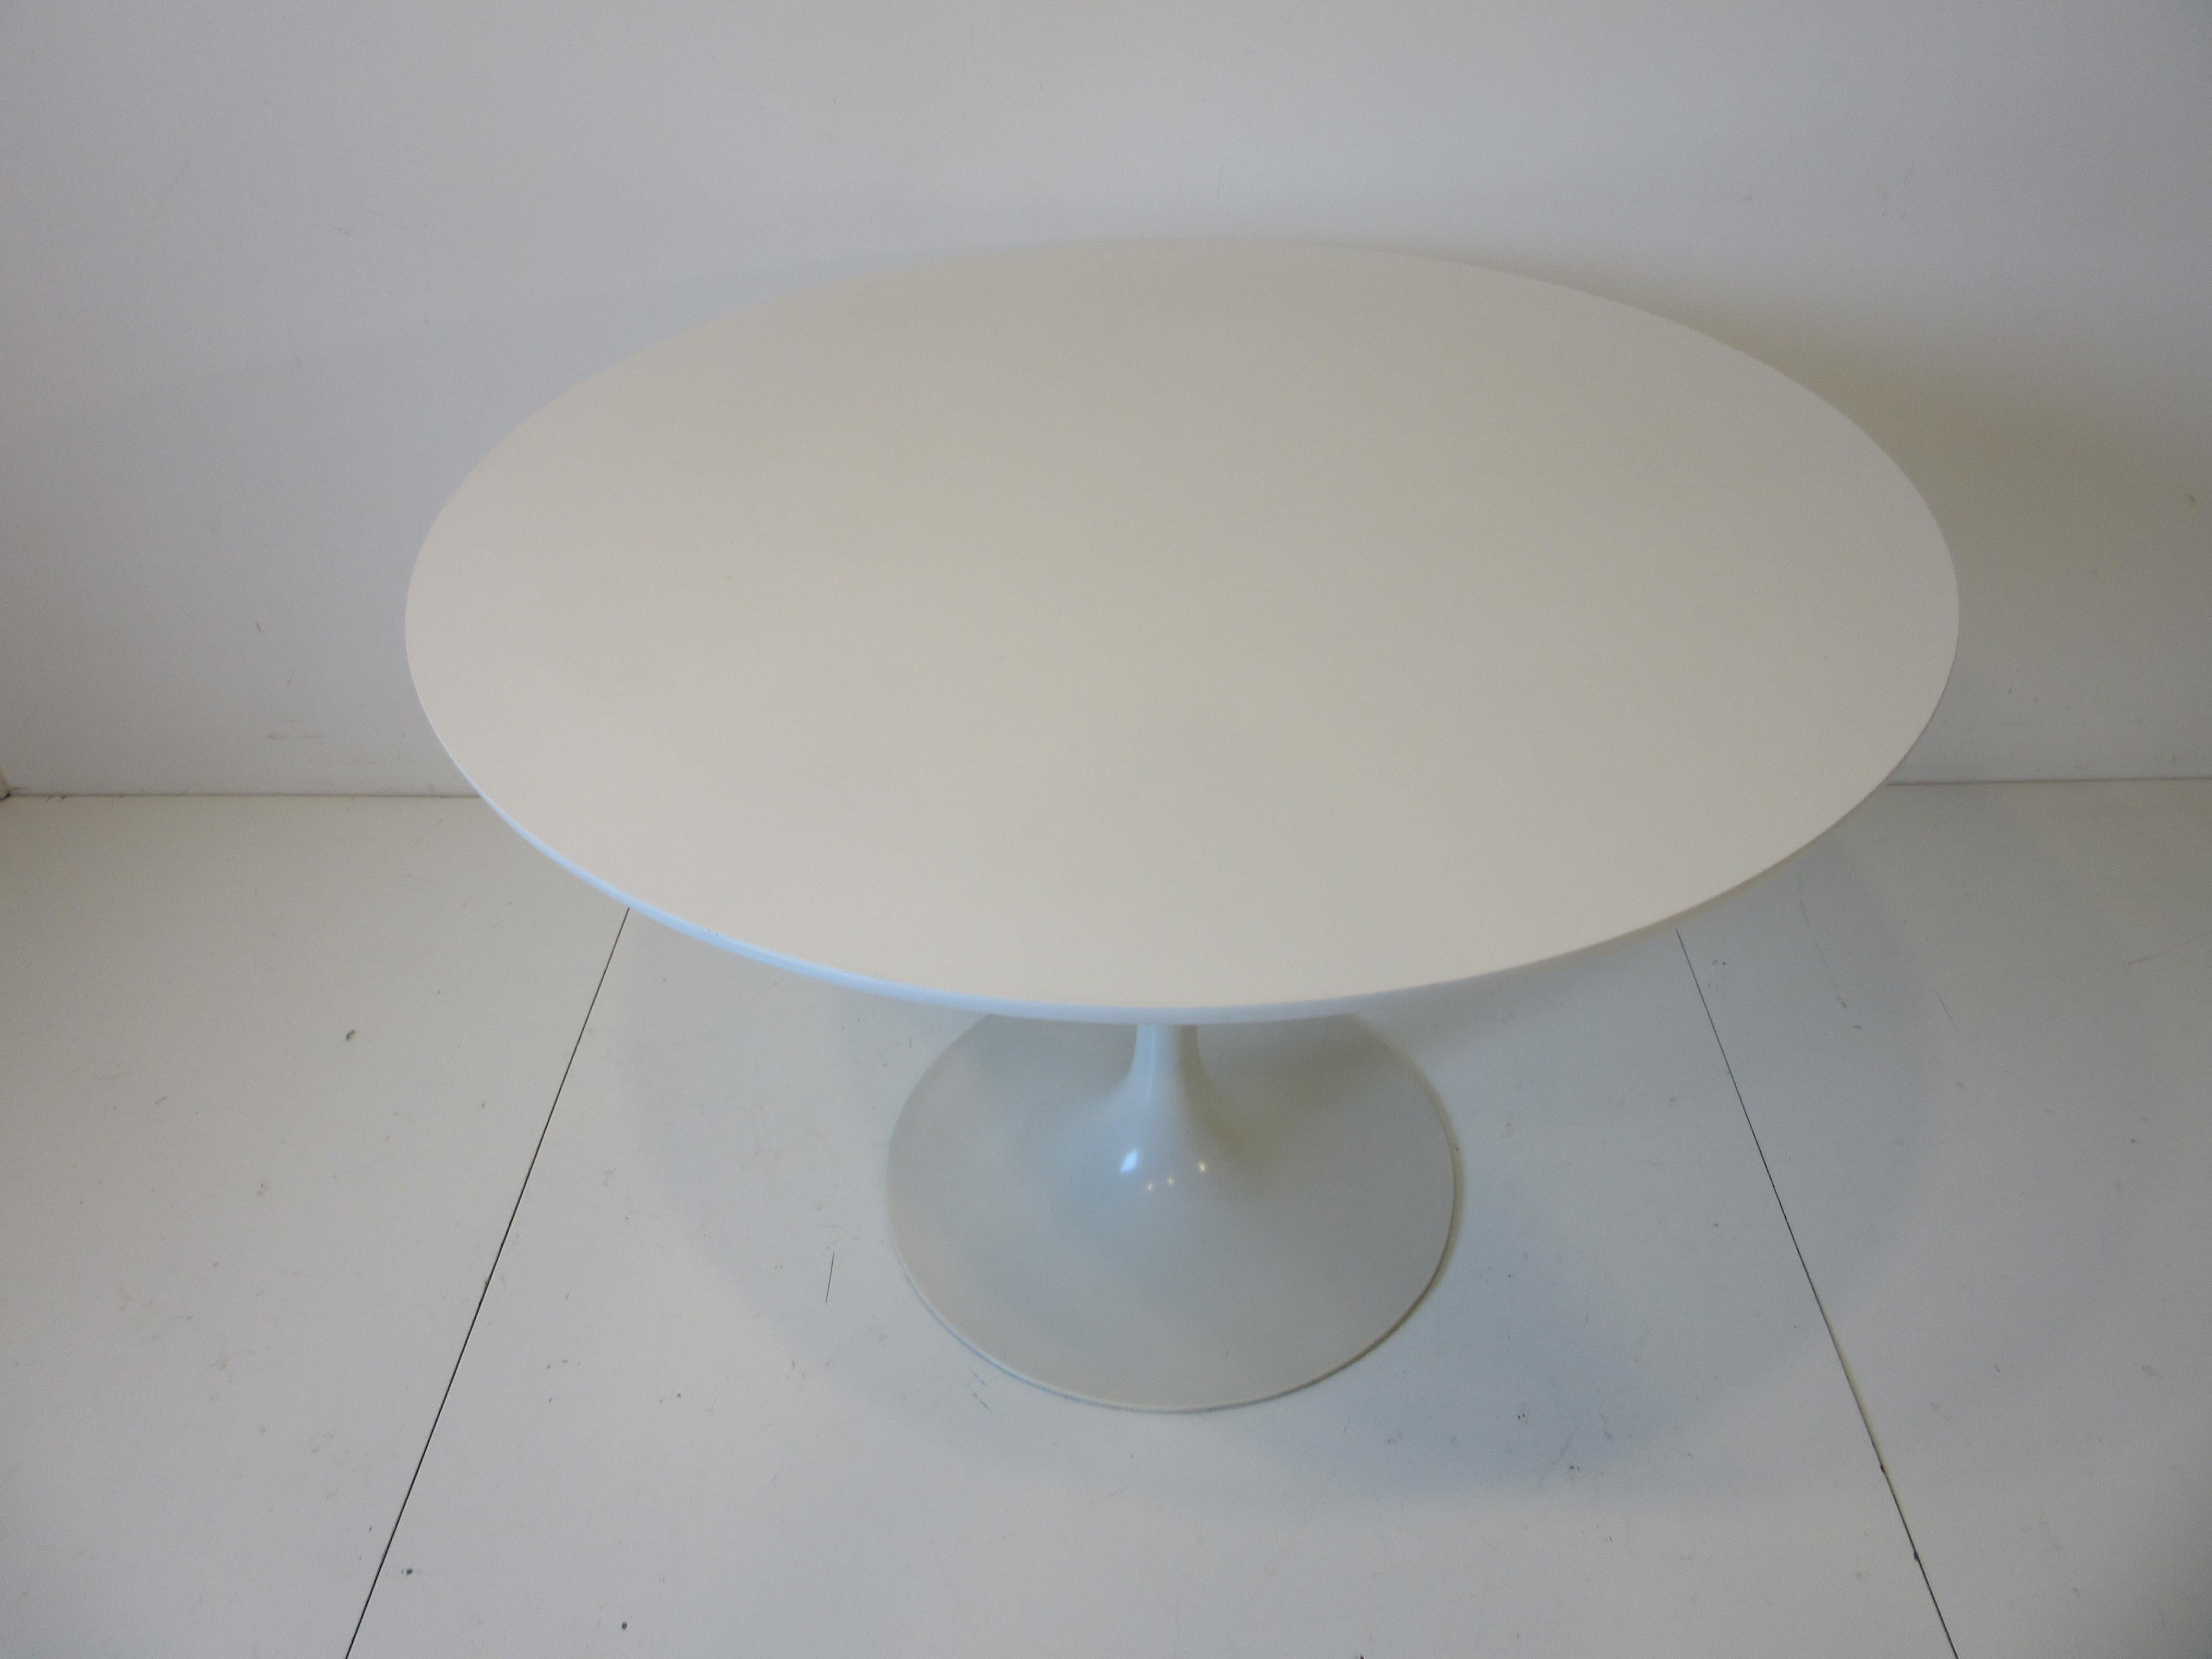 A nice white tulip dining table with matching laminate top having a rolled edge and metal base perfect for that eat in kitchen or smaller space. Designed and manufactured by the Burke Furniture company.